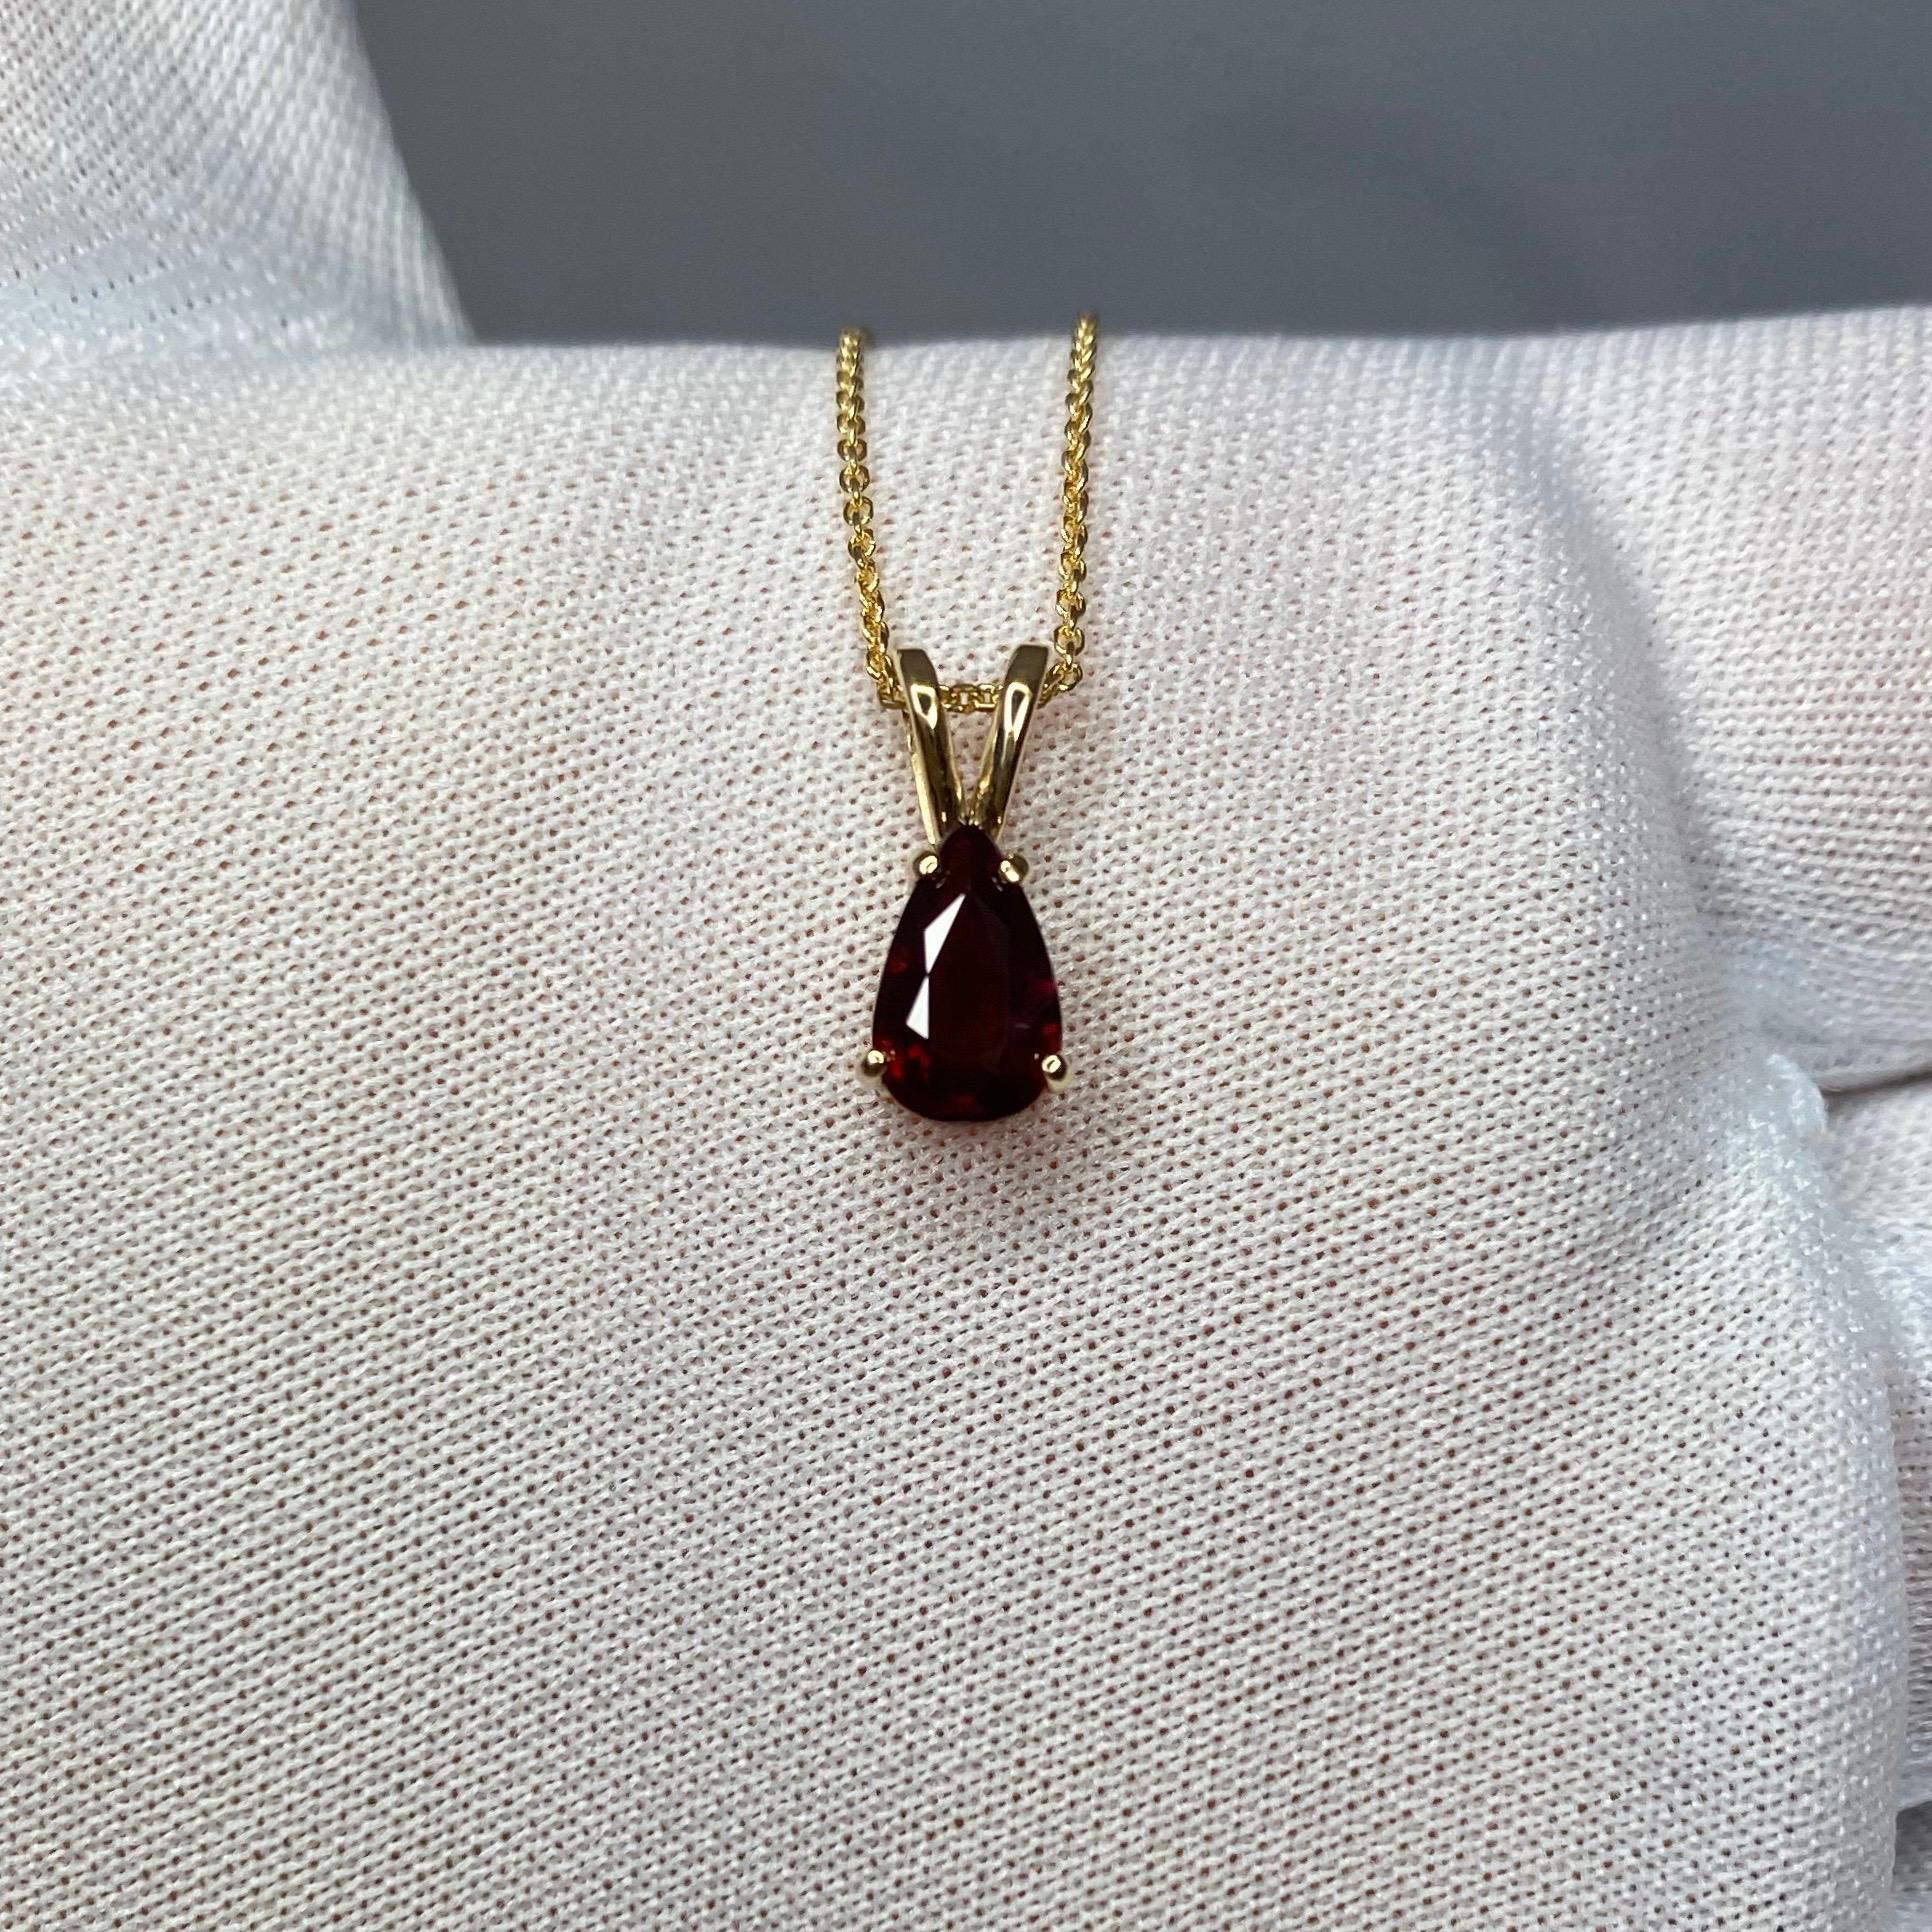 Beautiful natural deep purplish red ruby.
Set in a fine 14k yellow gold solitaire pendant.

Fully certified by IGI Antwerp confirming the stone as natural and describing its colour as 'Fine Quality'.

0.79ct ruby with a deep purplish red colour.